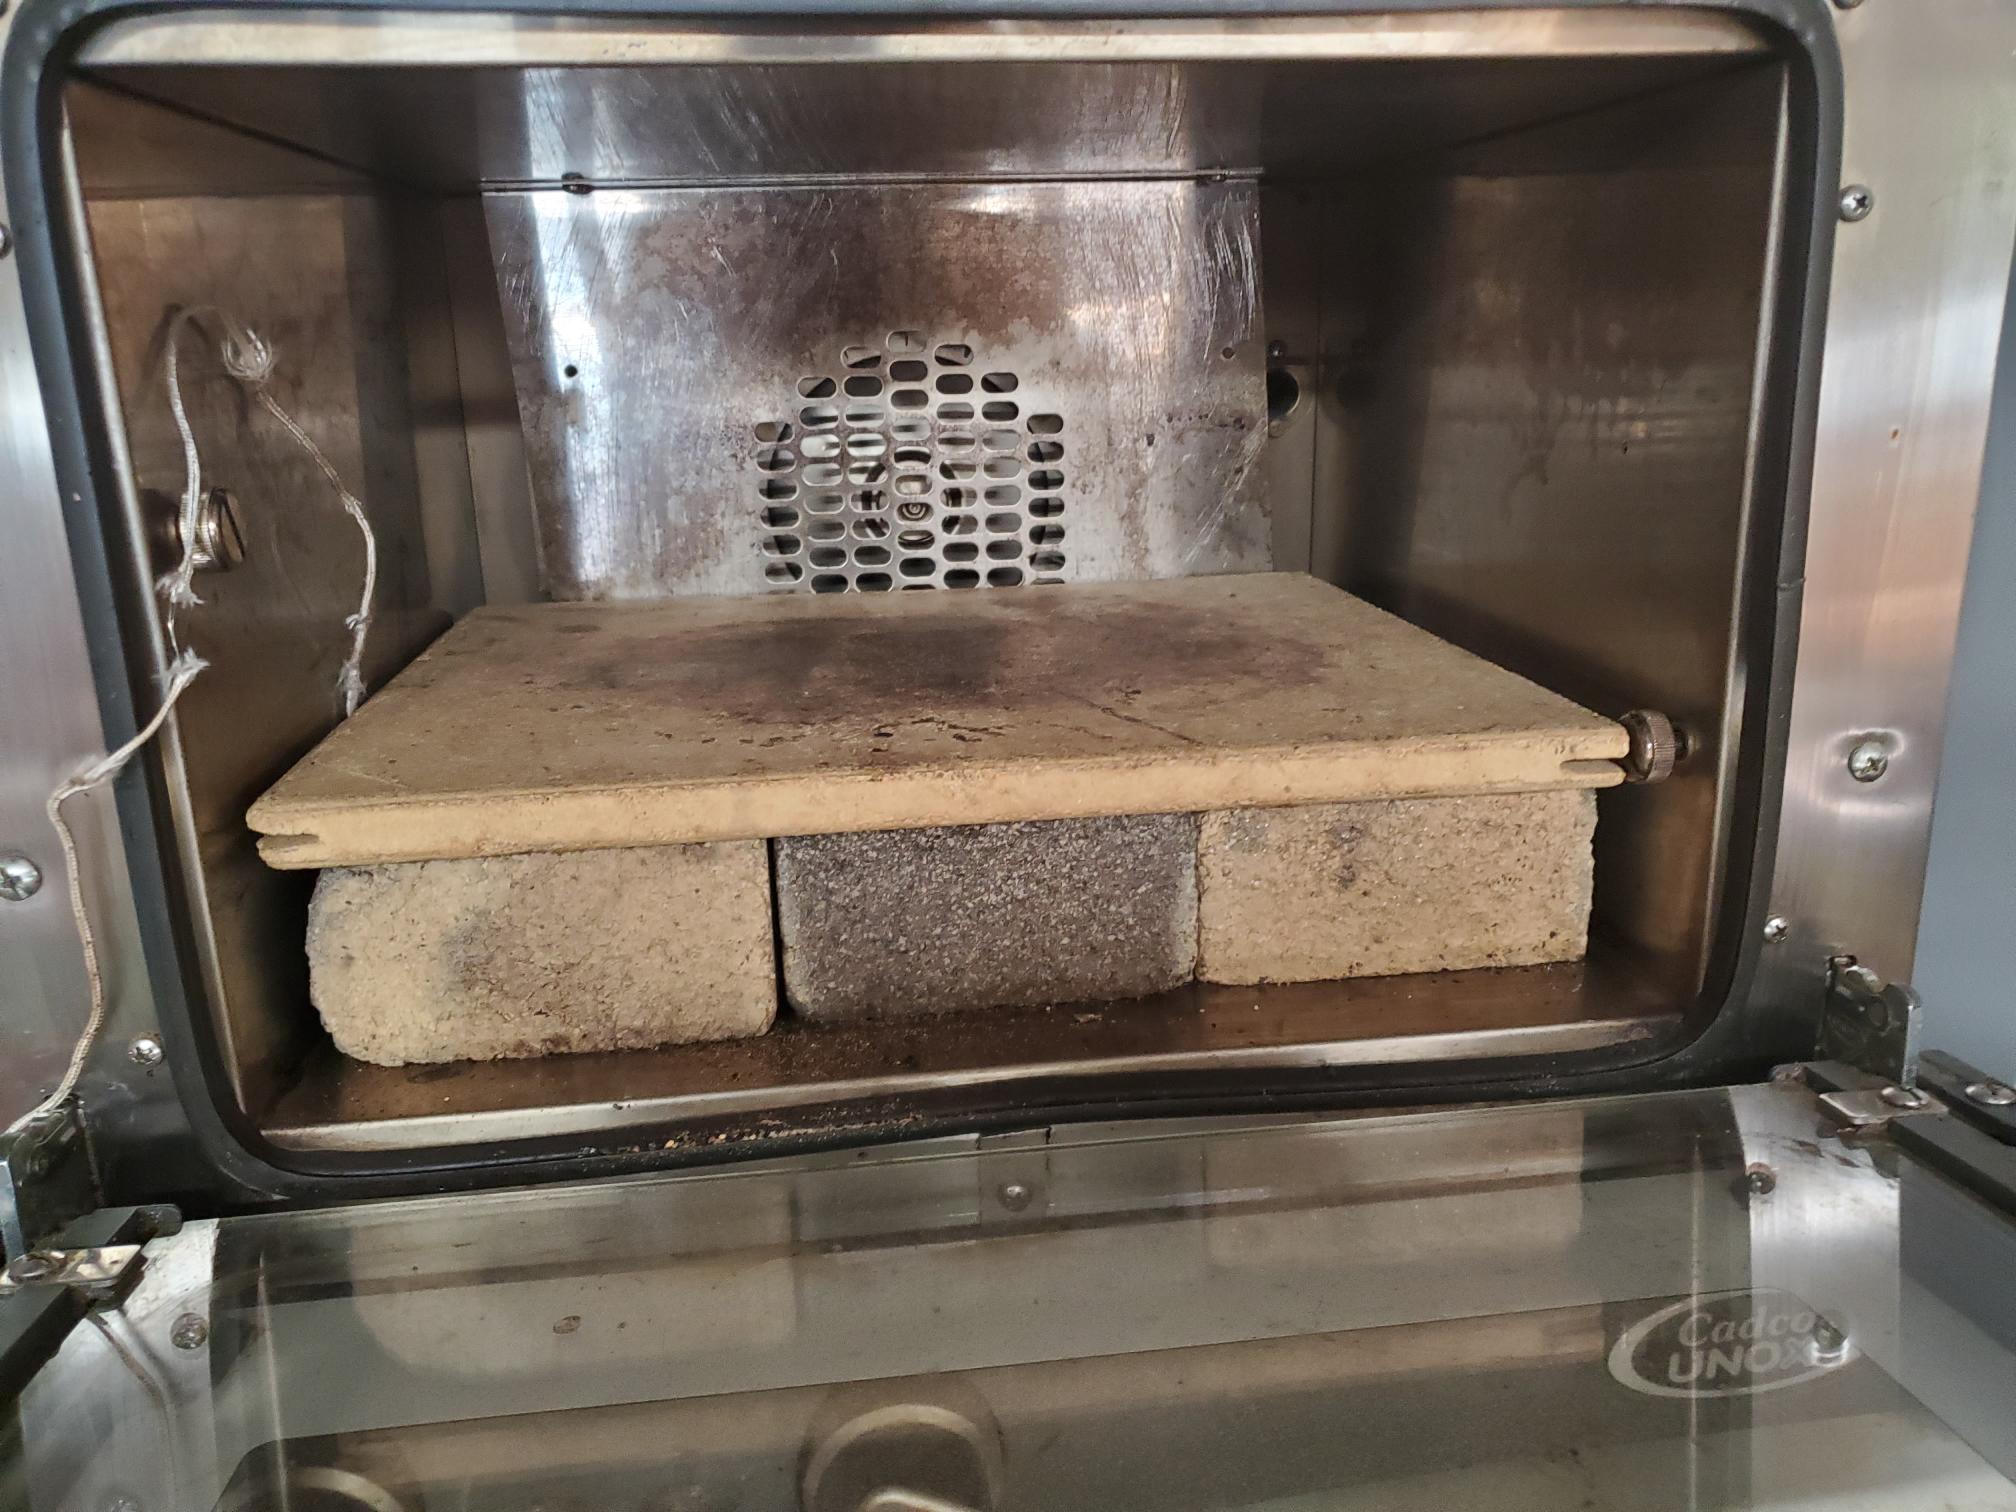 How to Bake in the Rofco Bread Oven